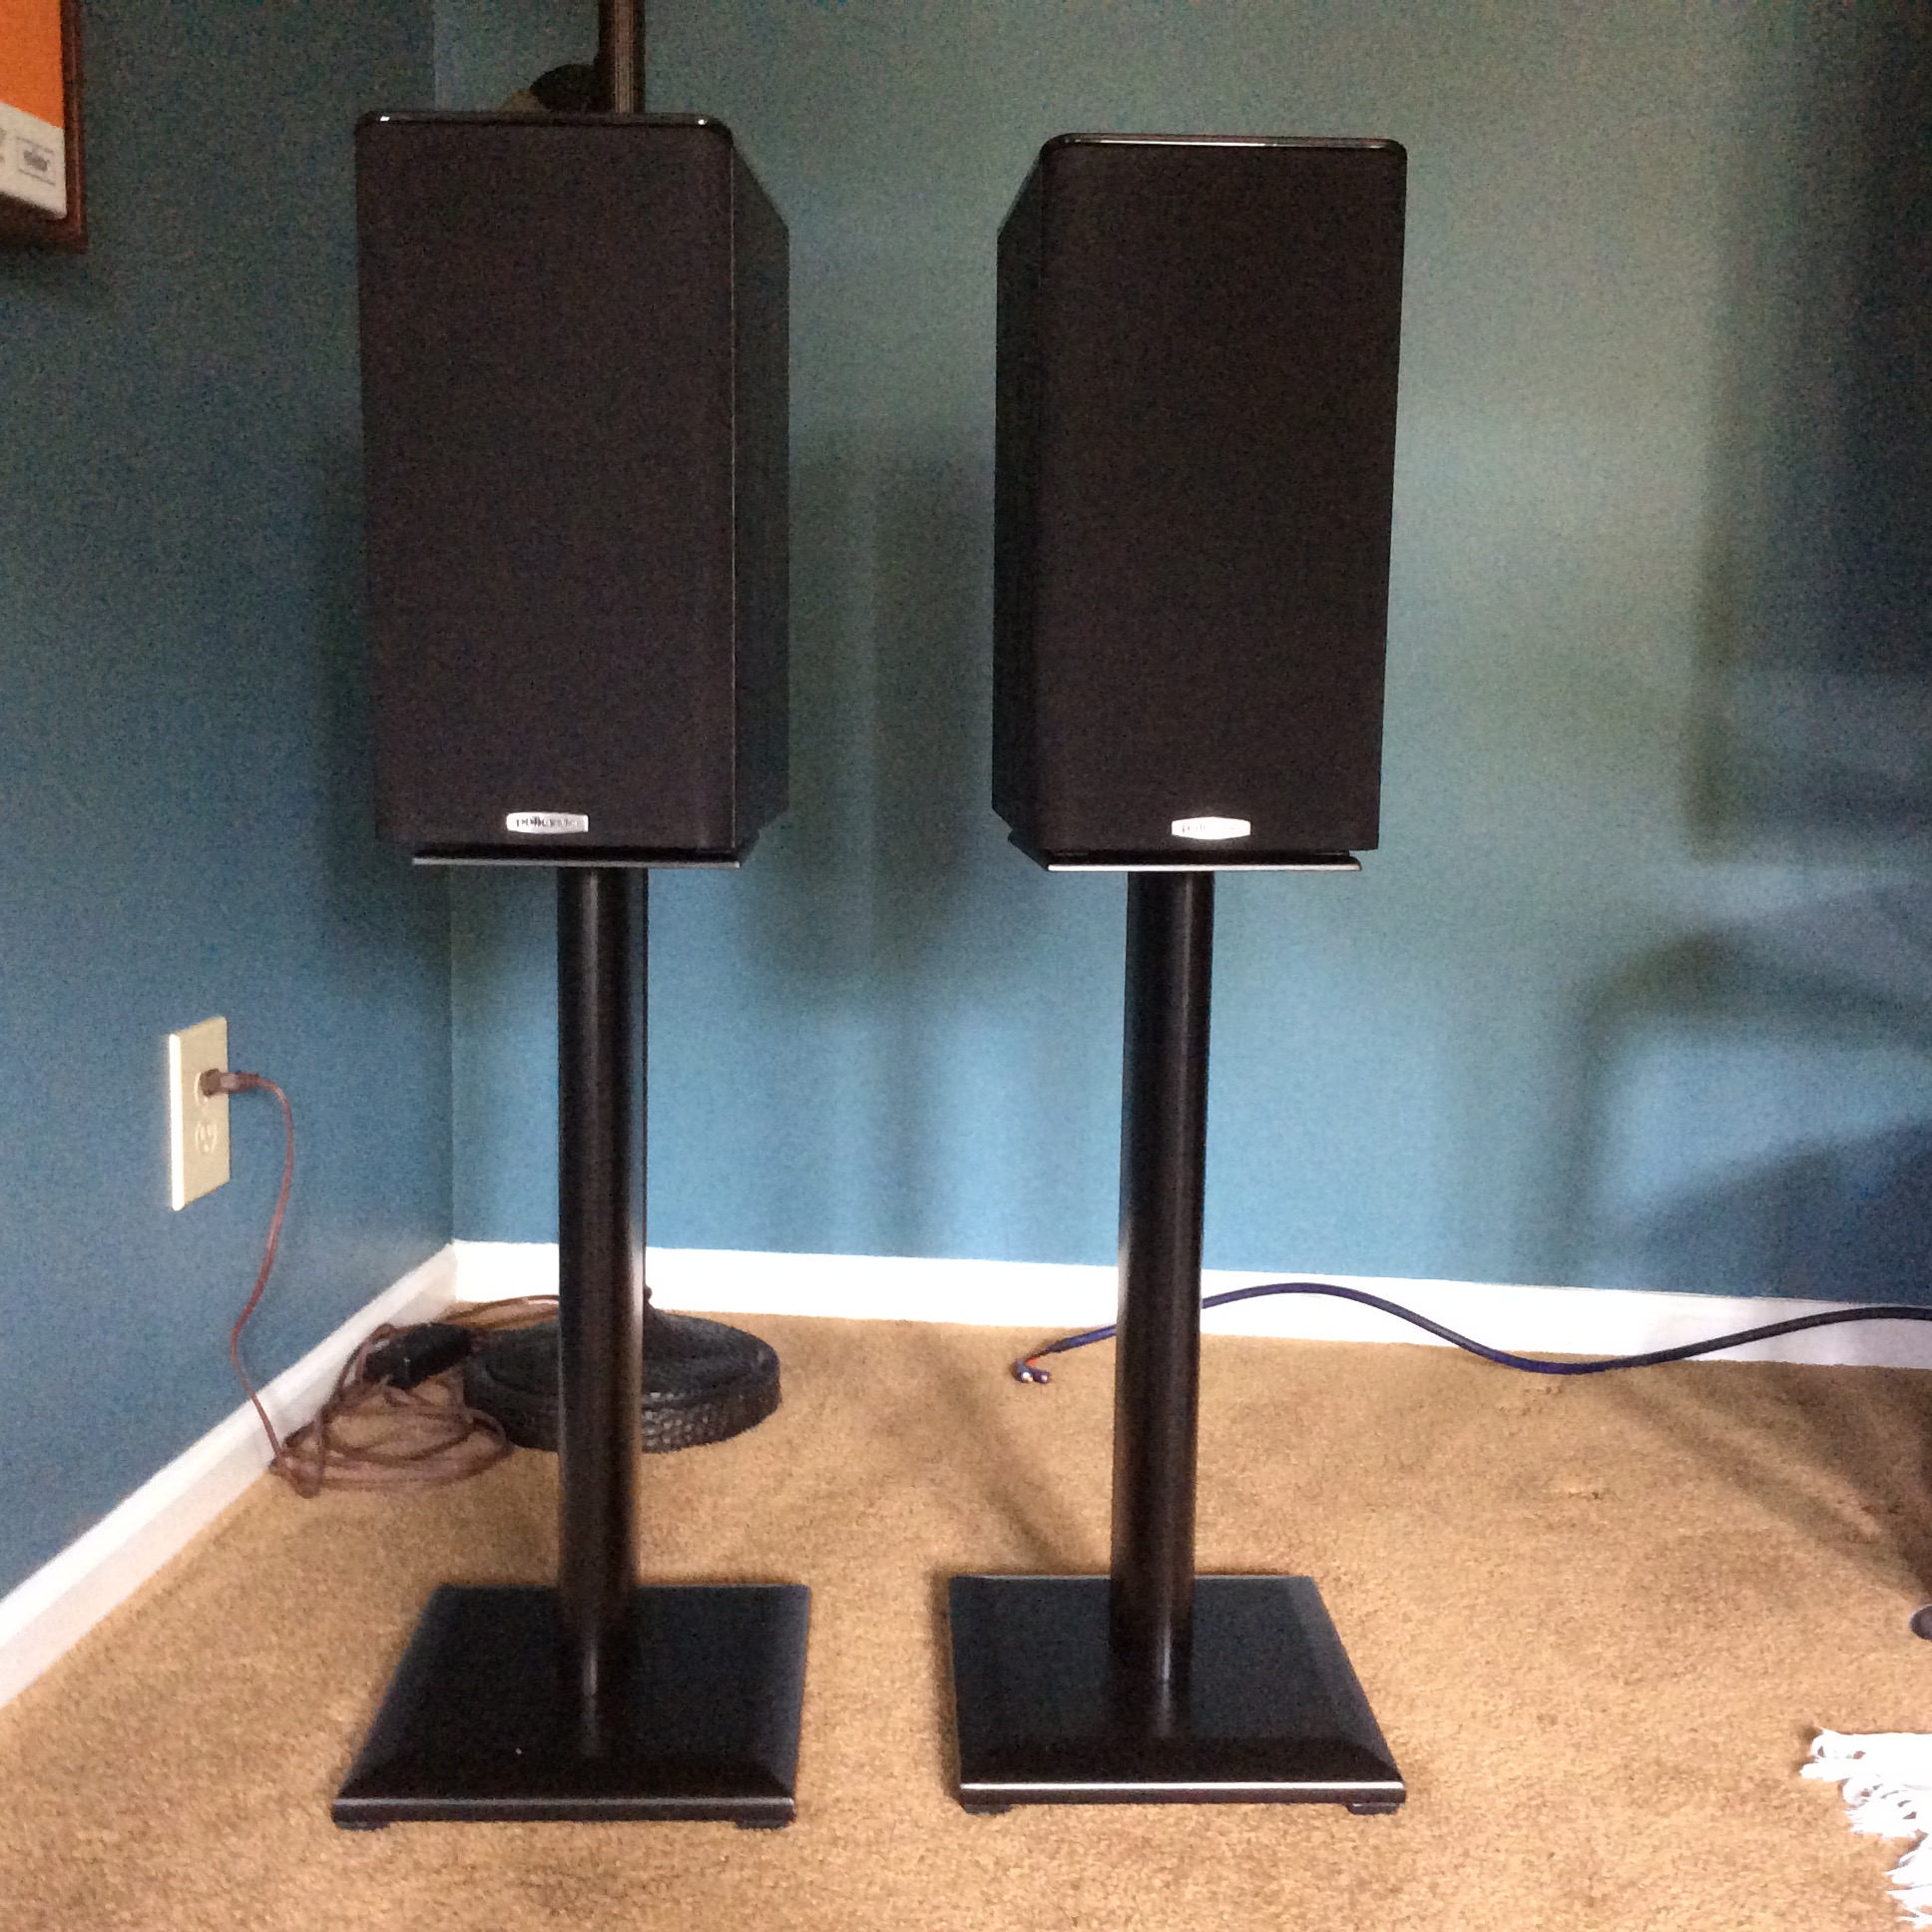 Polk TSi200 Speakers + Stands - Dayton, OH Local Pickup | Home Theater Forum